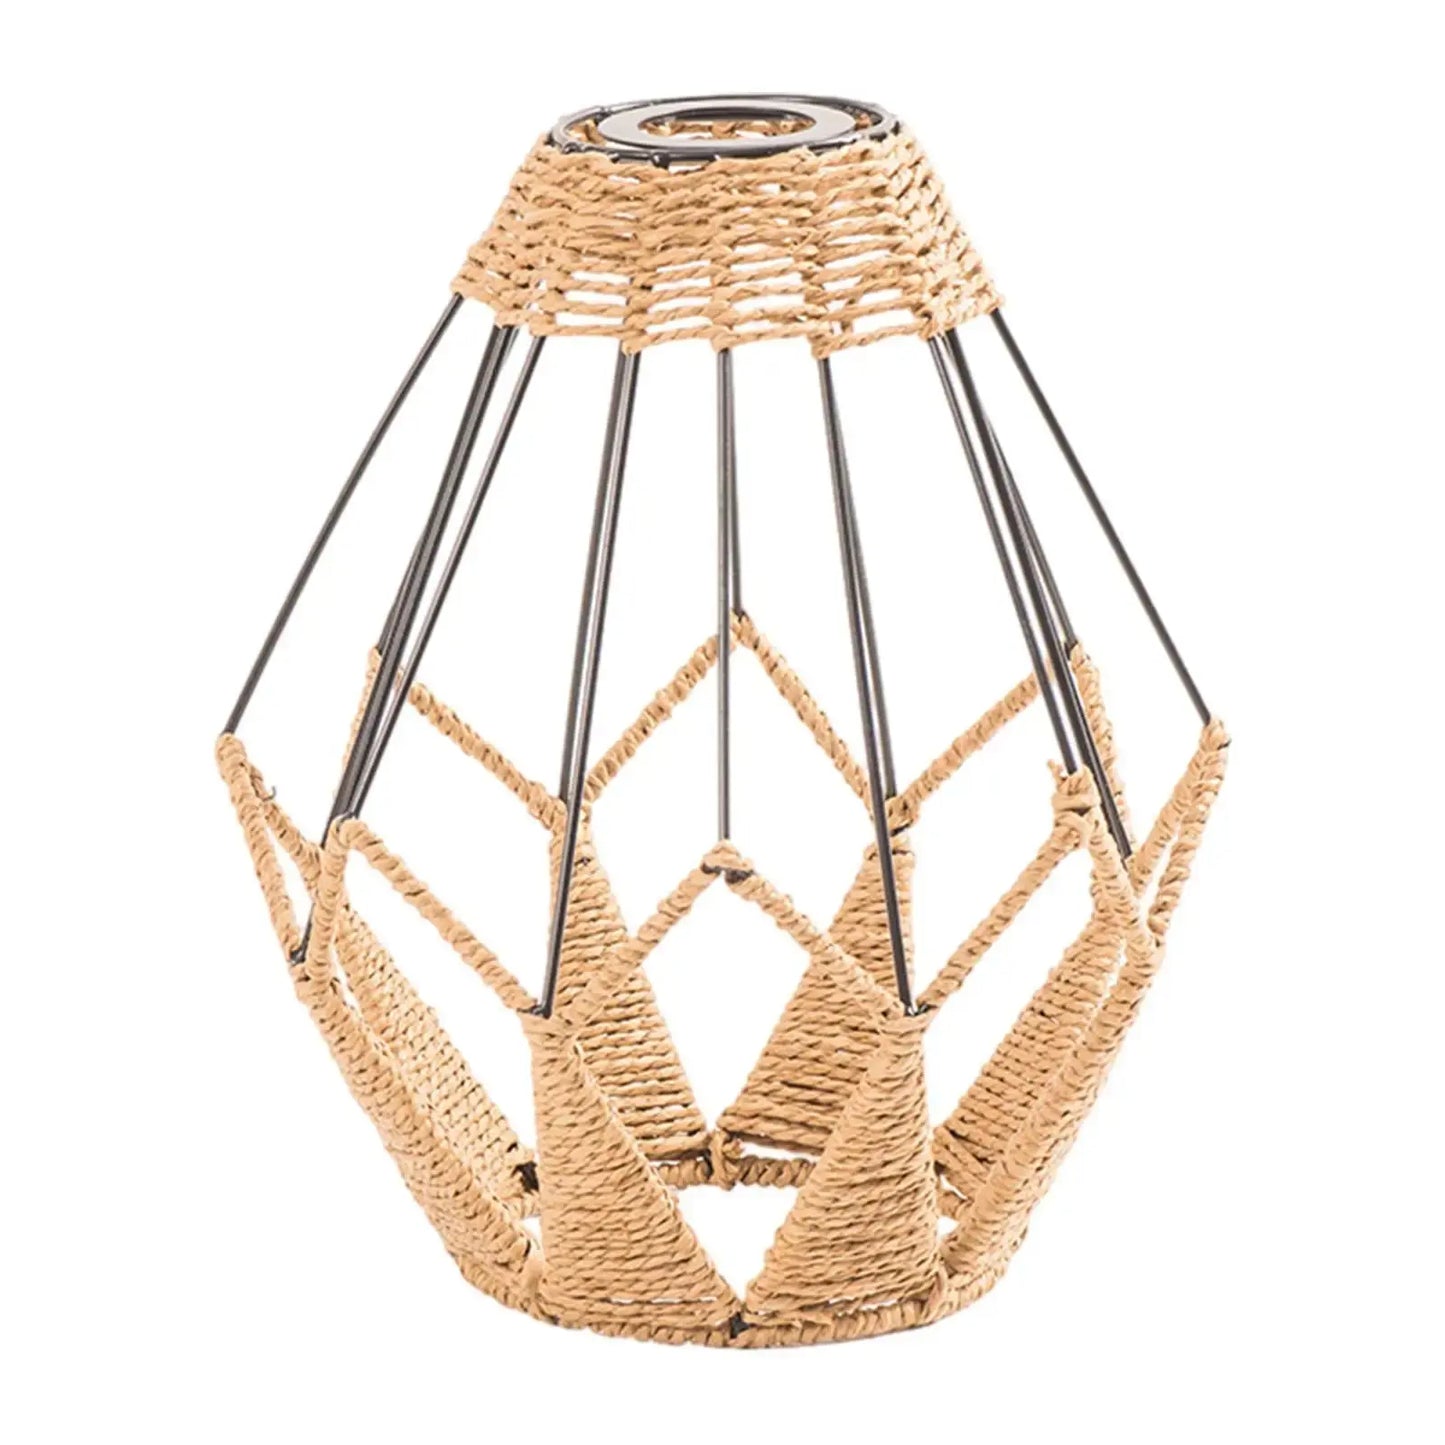 Rope Woven Lampshade Light Fixture Decoration Handmade Ceiling Lantern Cover for Restaurant Teahouse Dining Room Hotel Farmhouse ShadesArray